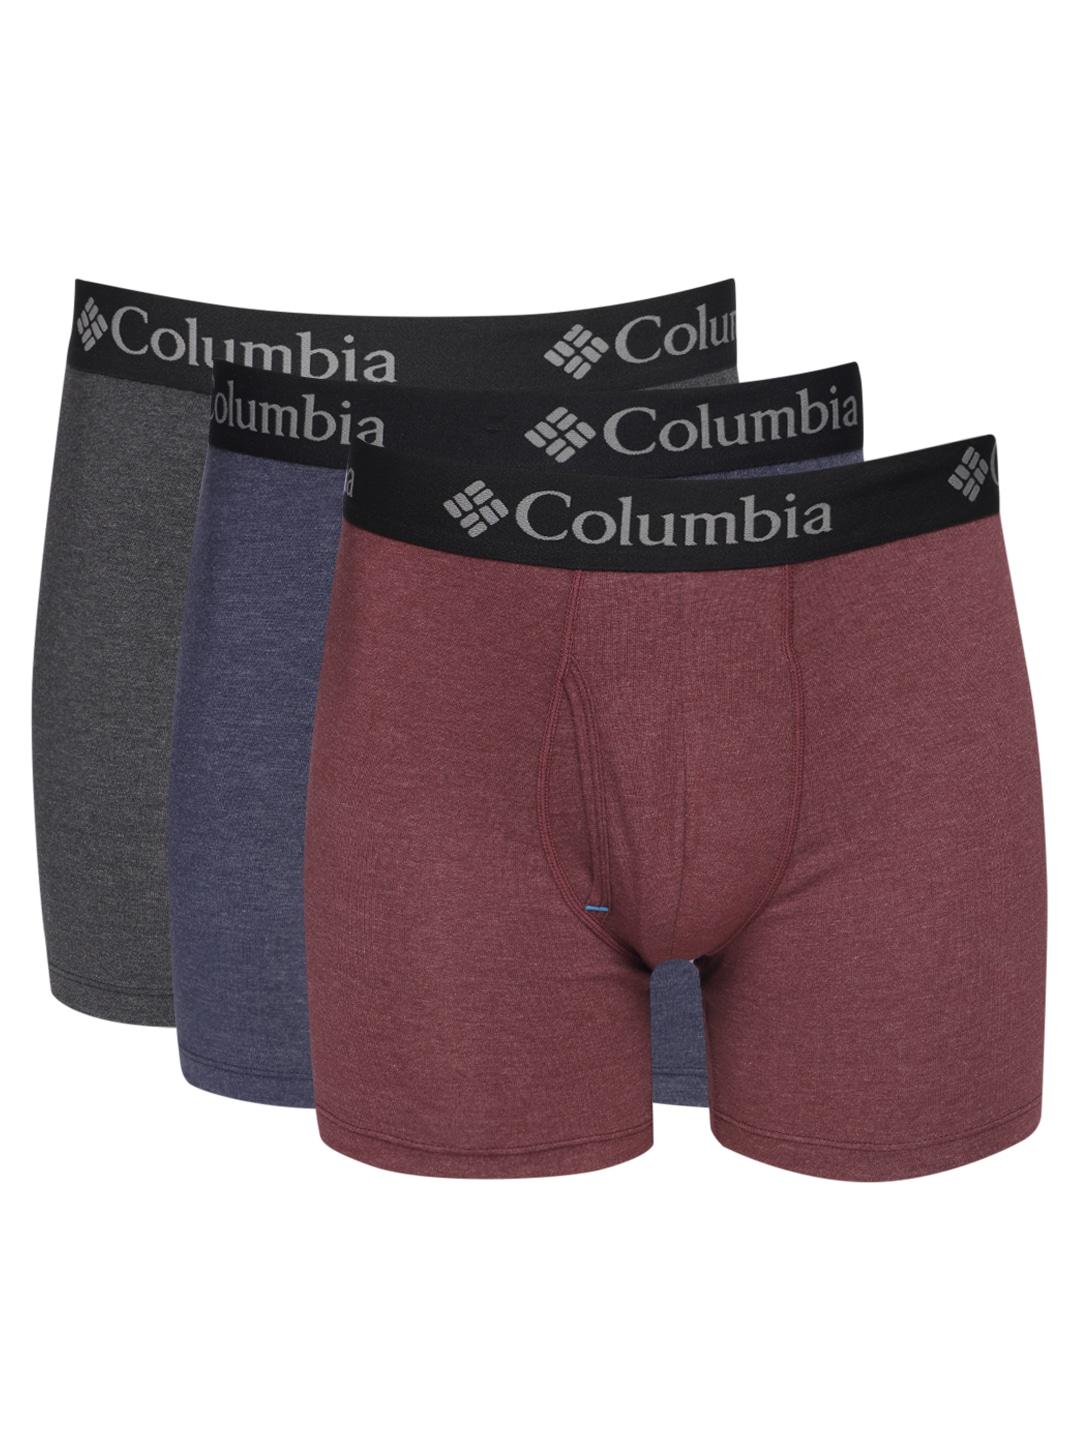 columbia men pack of 3 performance stretch boxer-style briefs